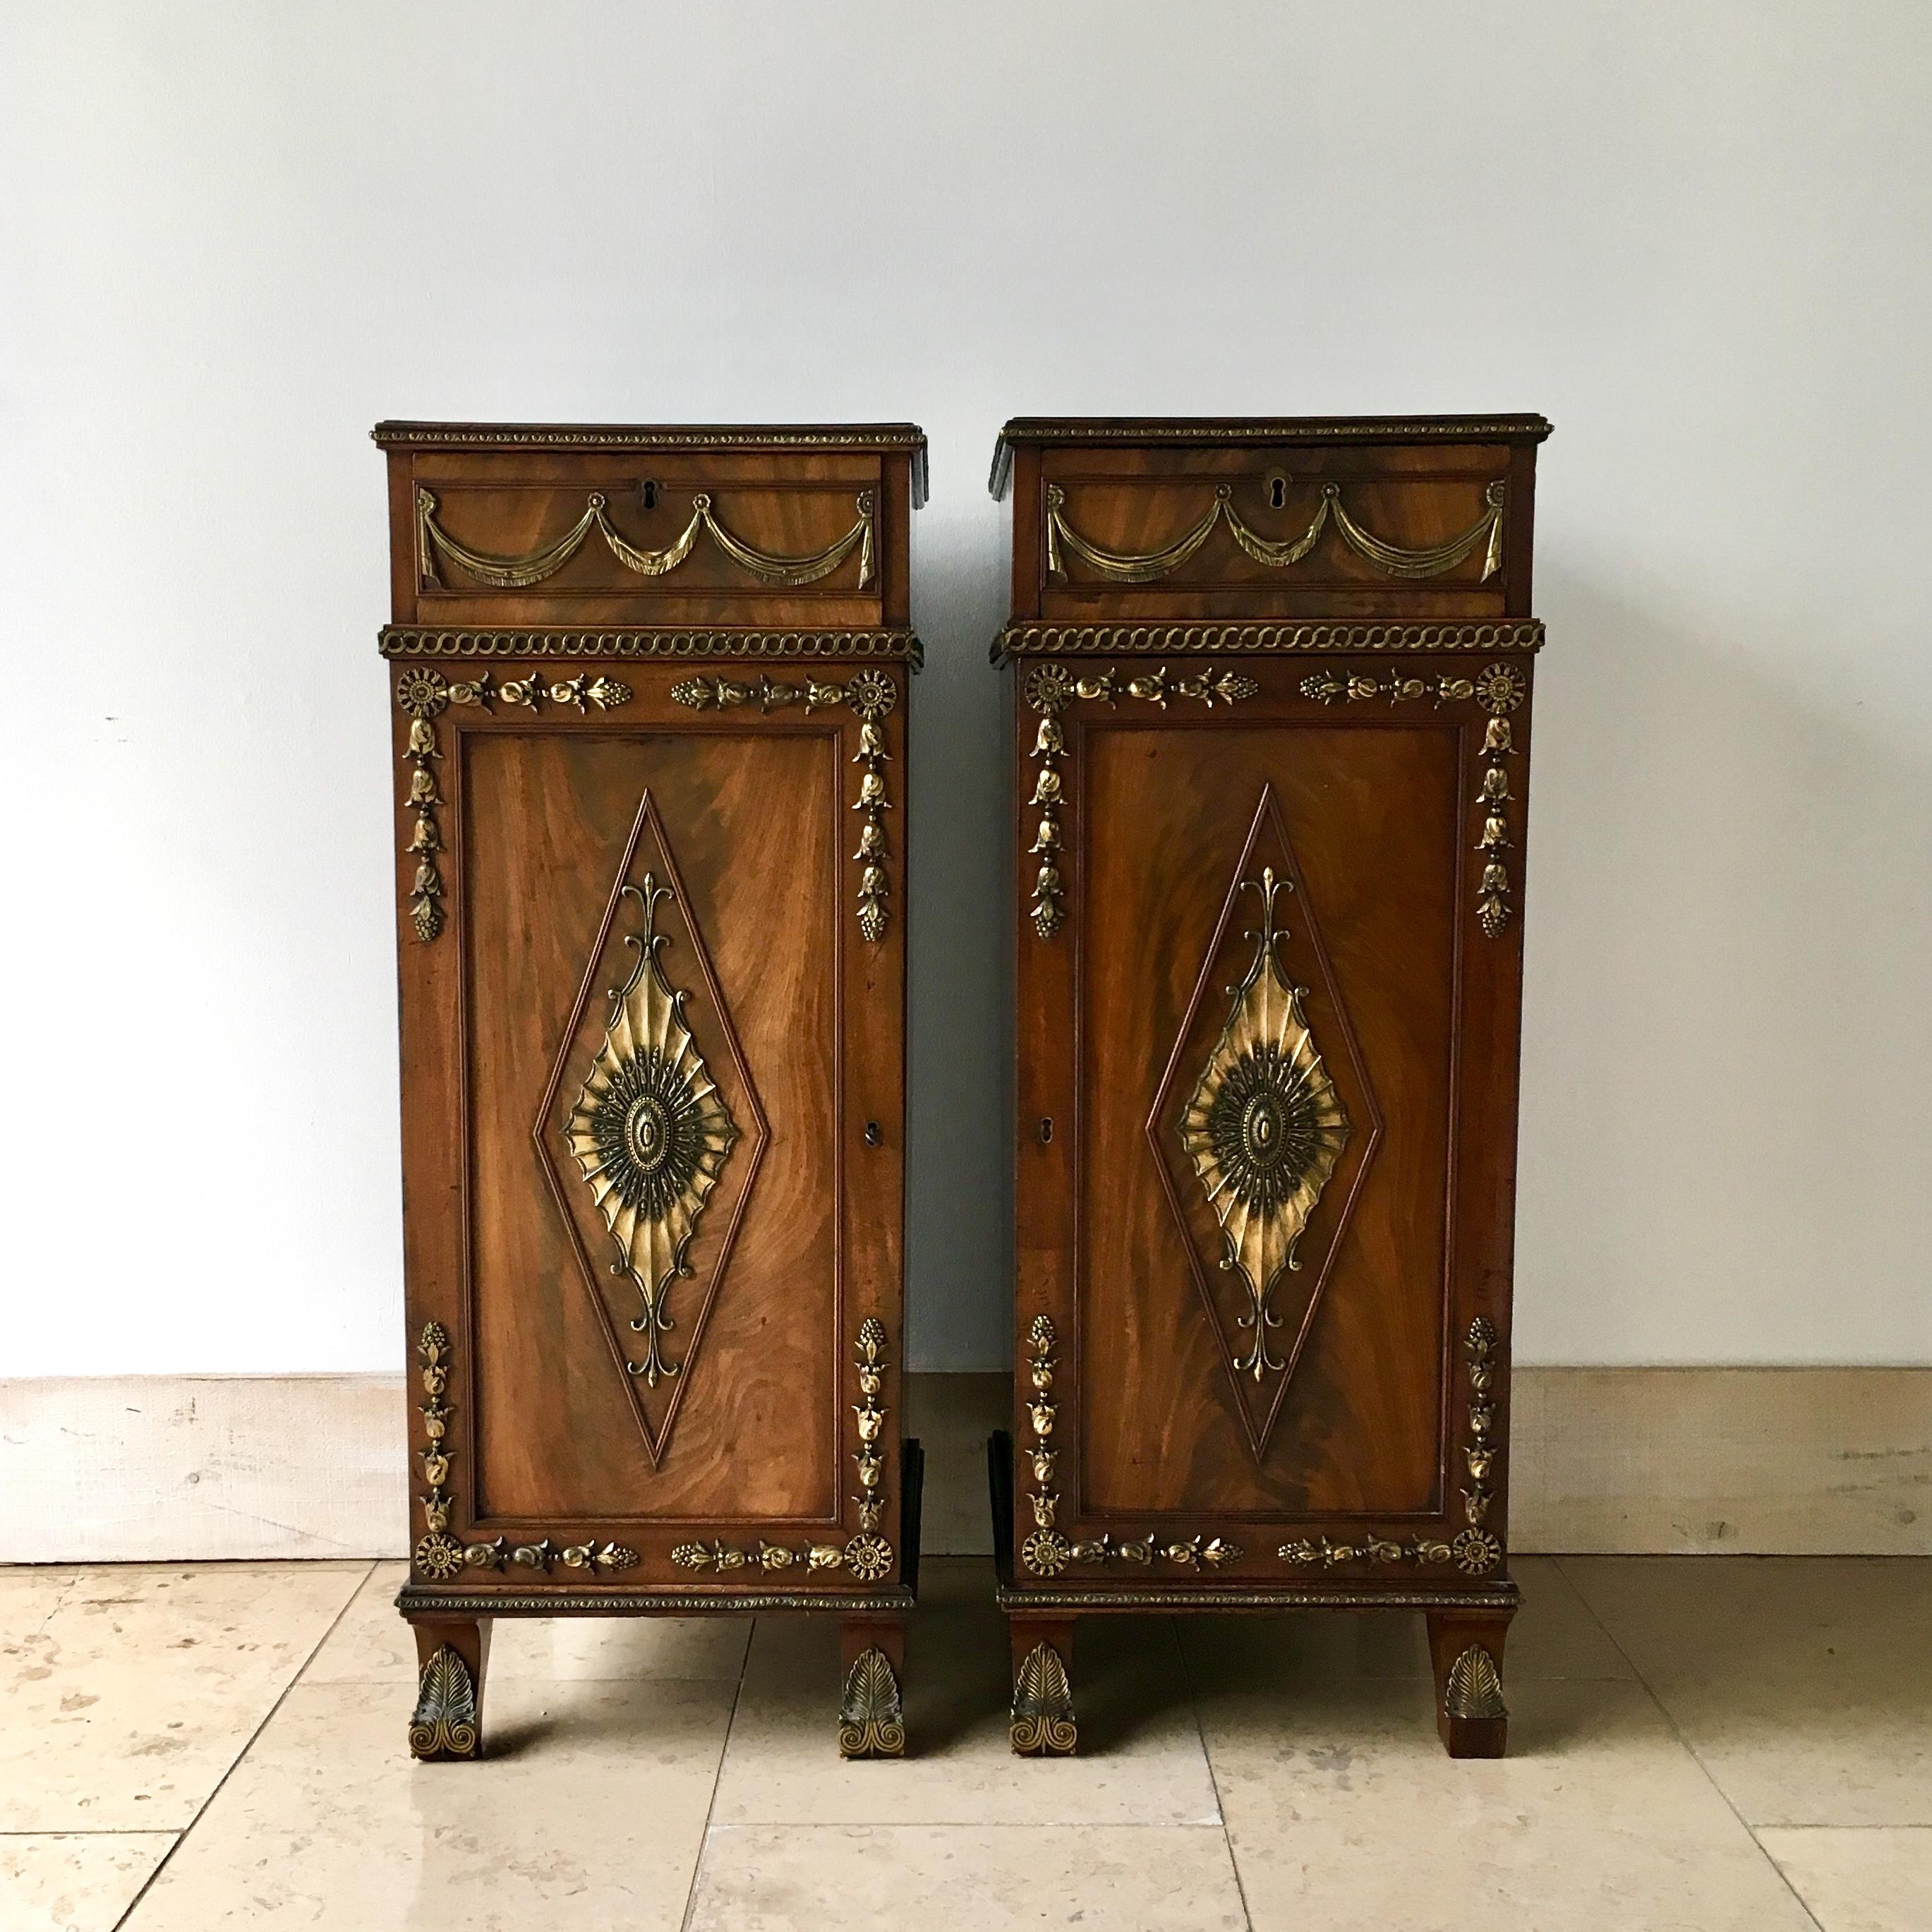 Pair of Irish Regency mahogany pedestals circa 1820 in unrestored original condition.

The pedestals each have drawers with ormolu swag detail and the doors have superb radiating ormolu fan detail. Each pedestals interior are fitted out with